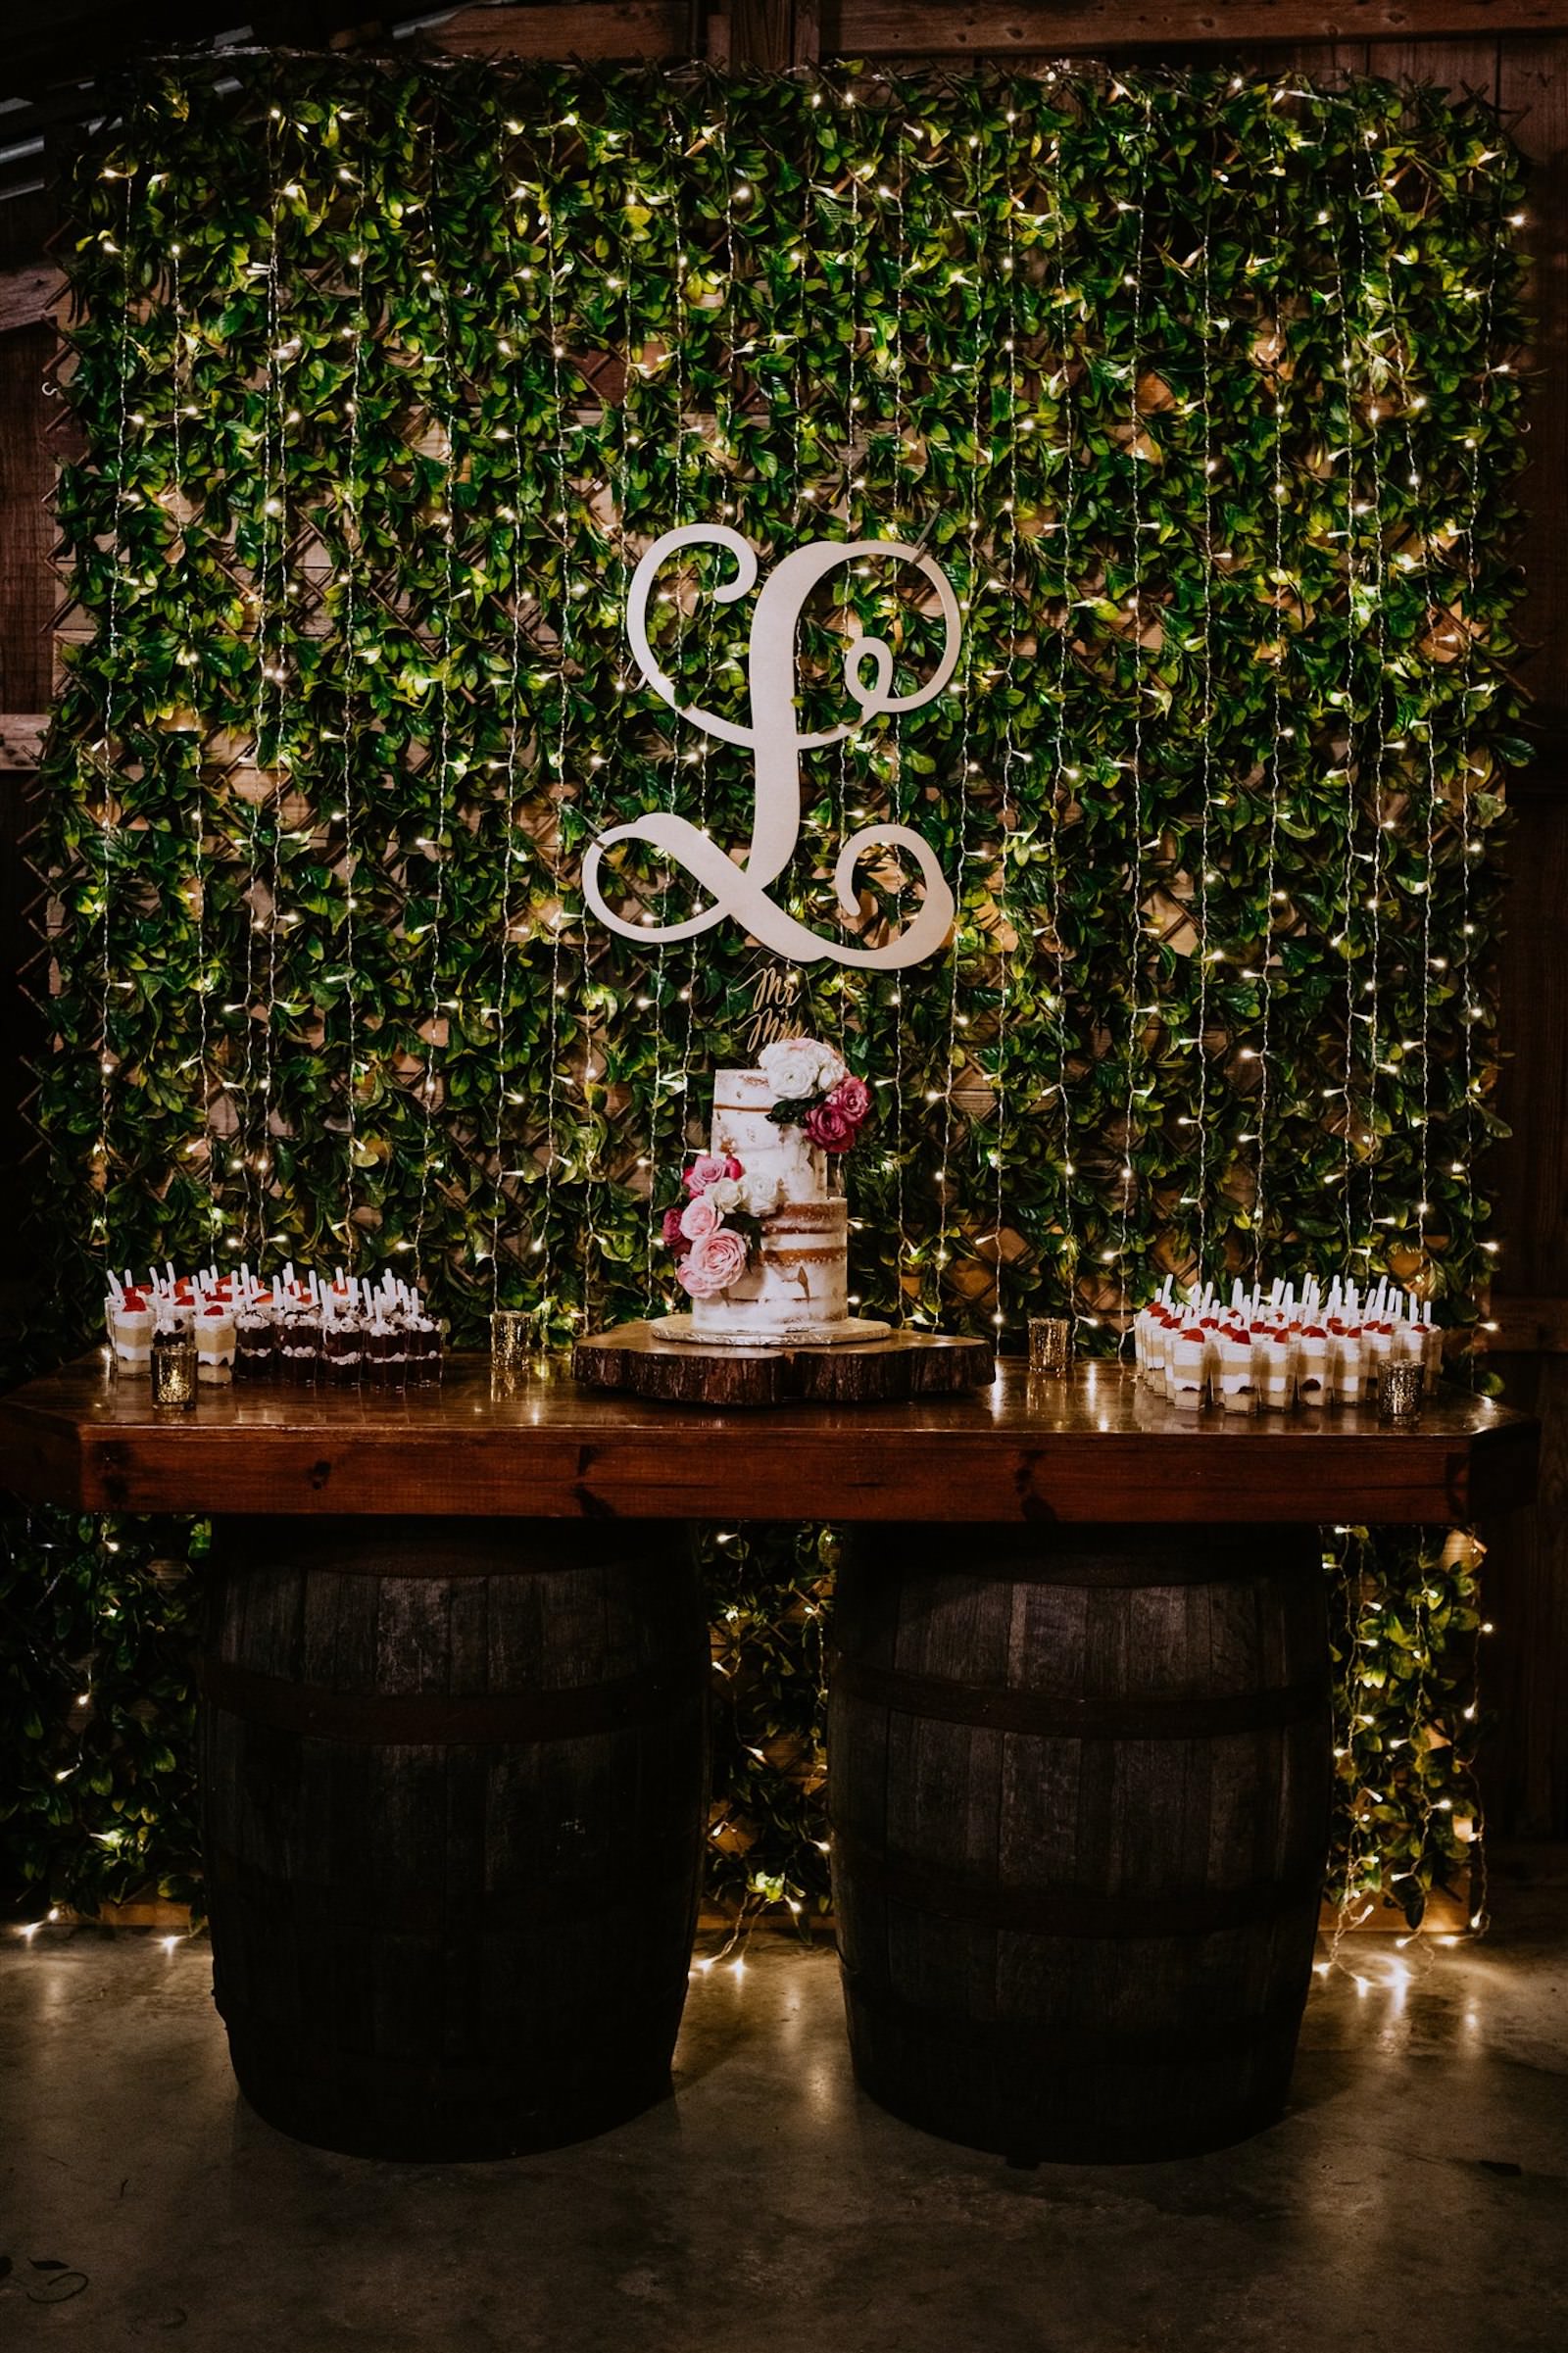 Wood Barrel Wedding Cake Table with Greenery Wall Backdrop and Twinkle Lights and Monogram Sign | Two Tier Naked Cake with Fresh Garden Rose Peony Flower Accents | Mini Dessert Shot Parfaits Wedding Dessert Table